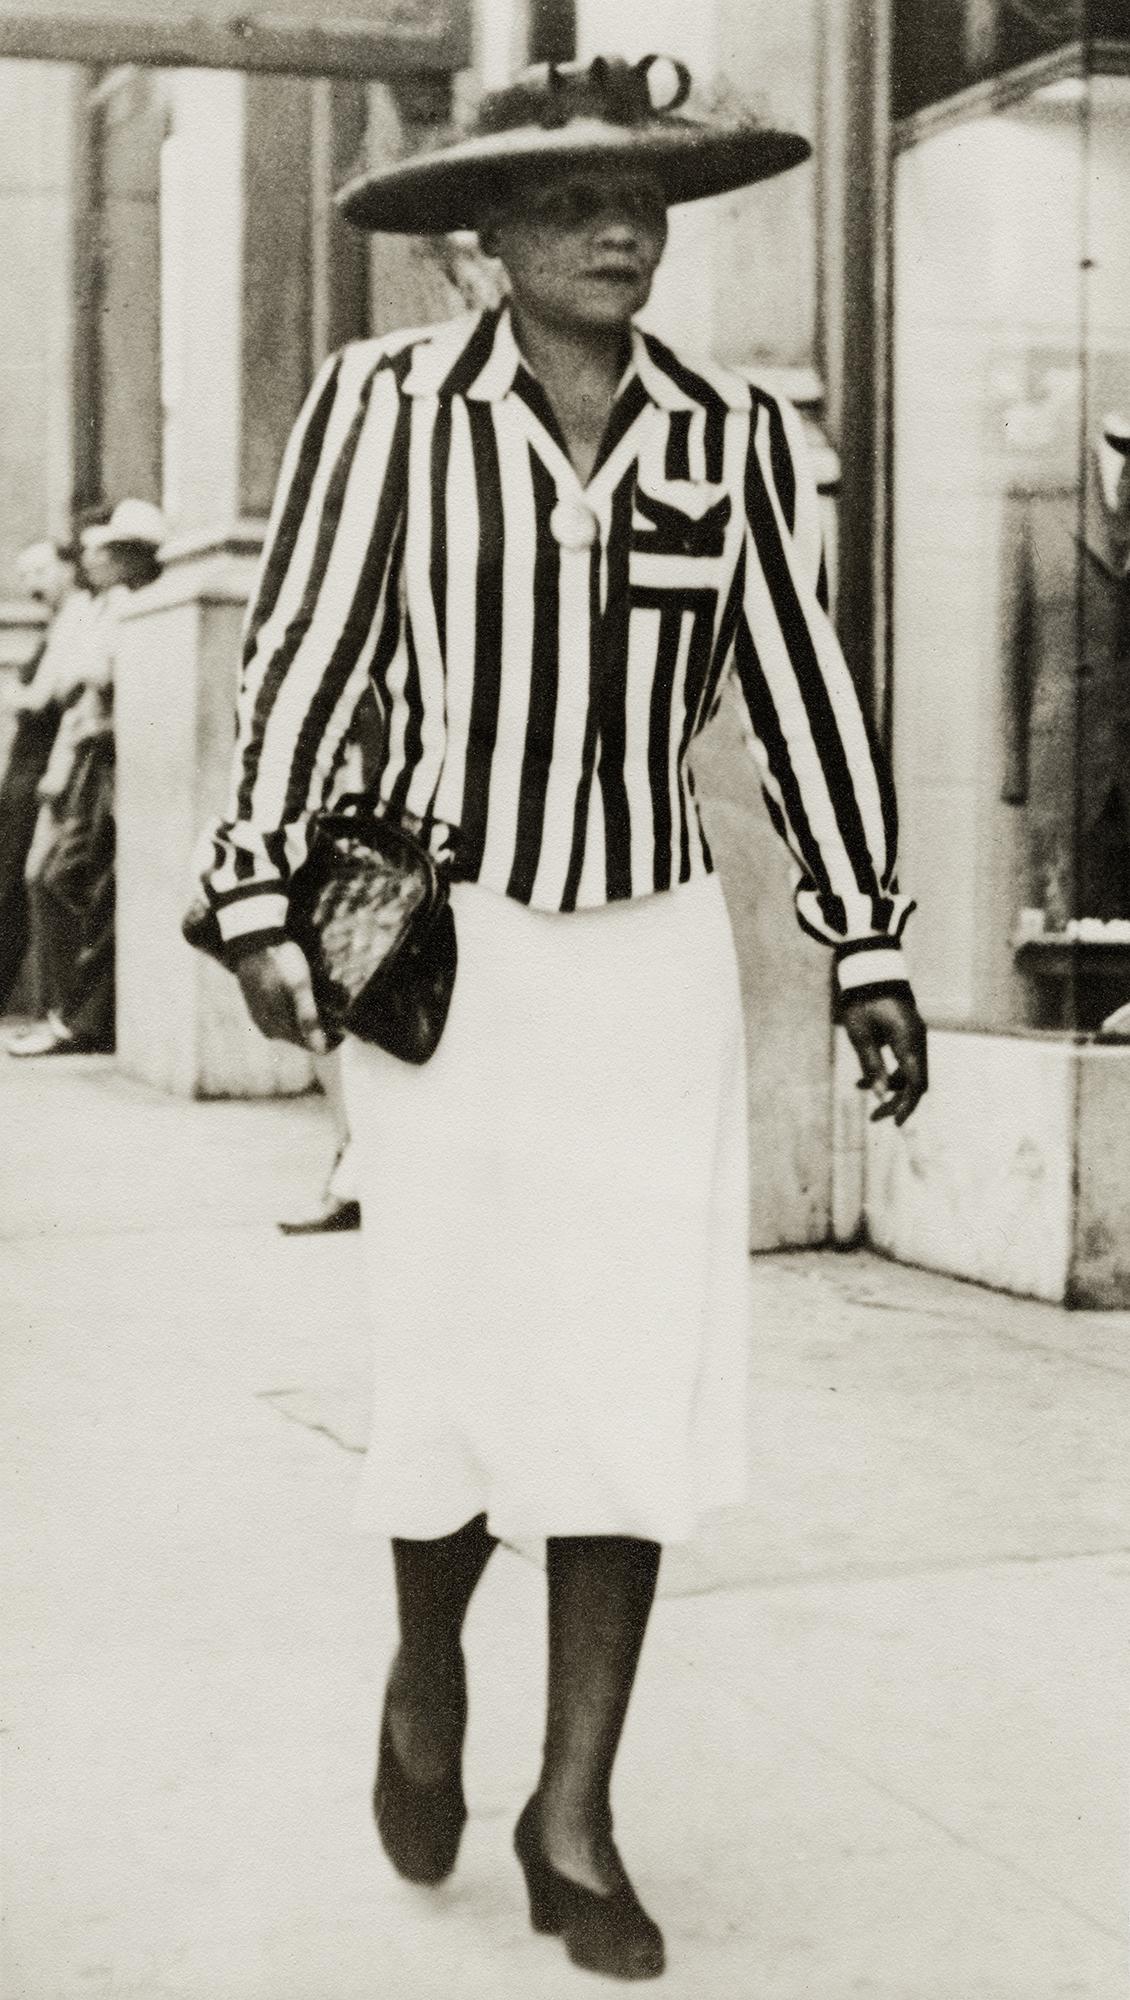 Unknown, Prophet in Striped Shirt with Hat, 1950